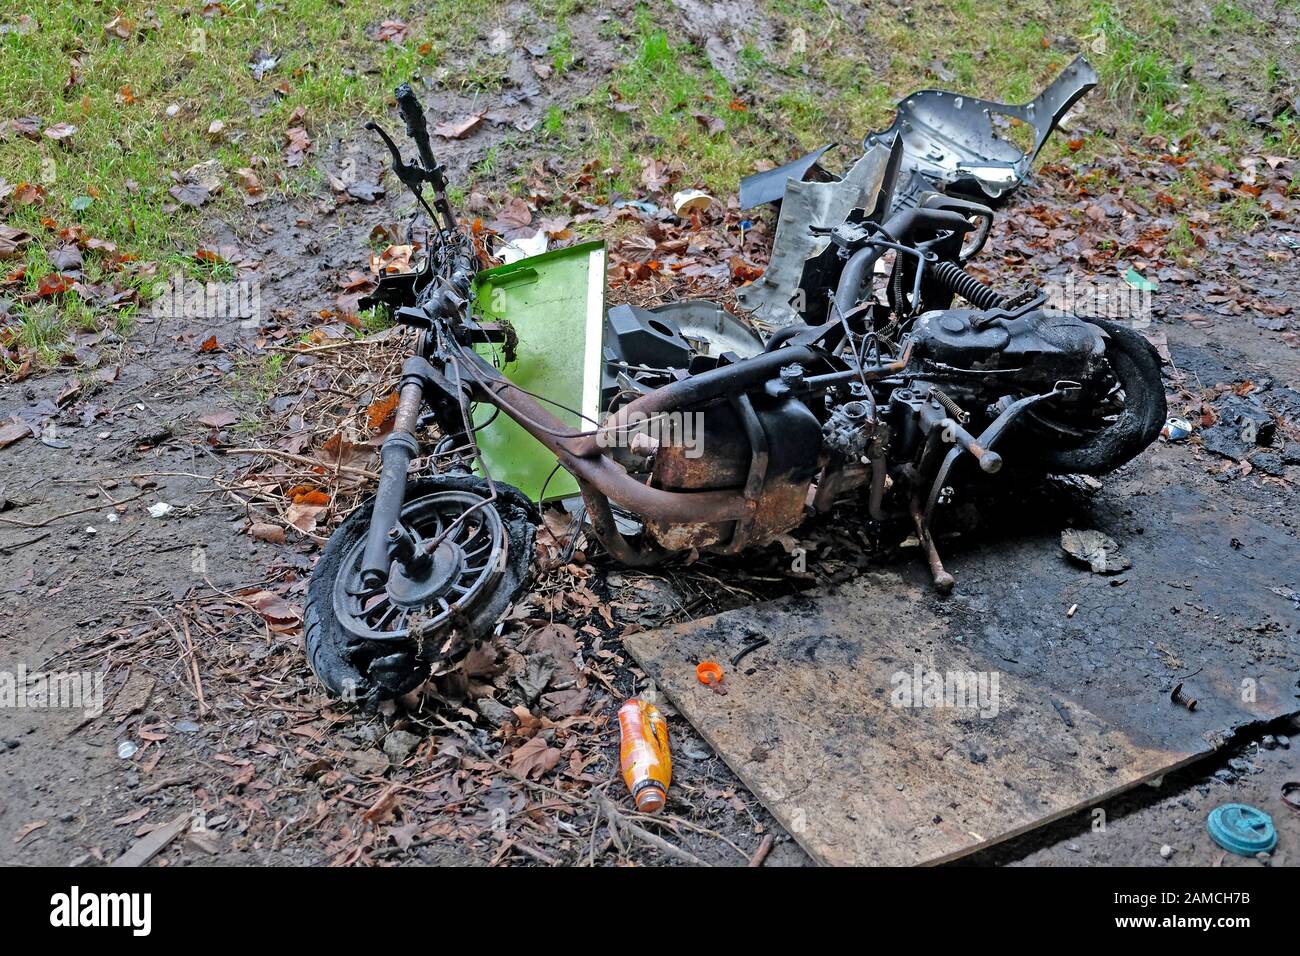 December 2019 - Motor burnout after being stolen in Stock Photo - Alamy